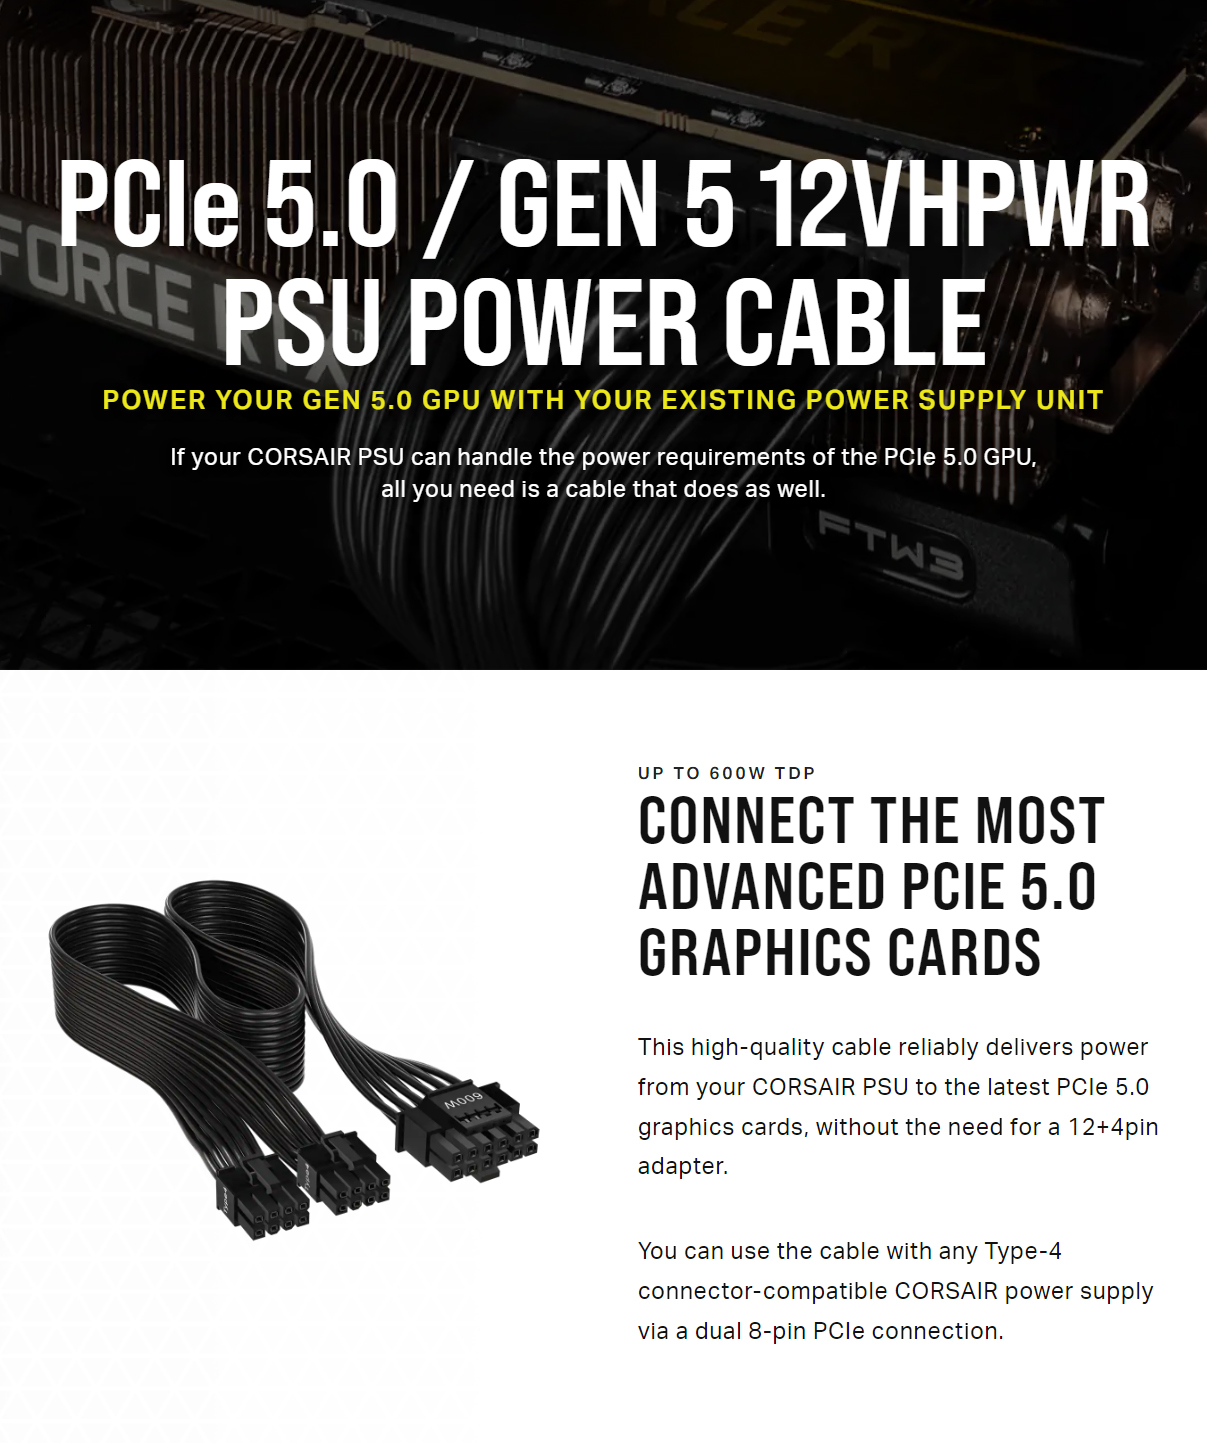 Internal-Power-Cables-Corsair-600W-PCIe-5-0-12VHPWR-Type-4-PSU-Power-Cable-2